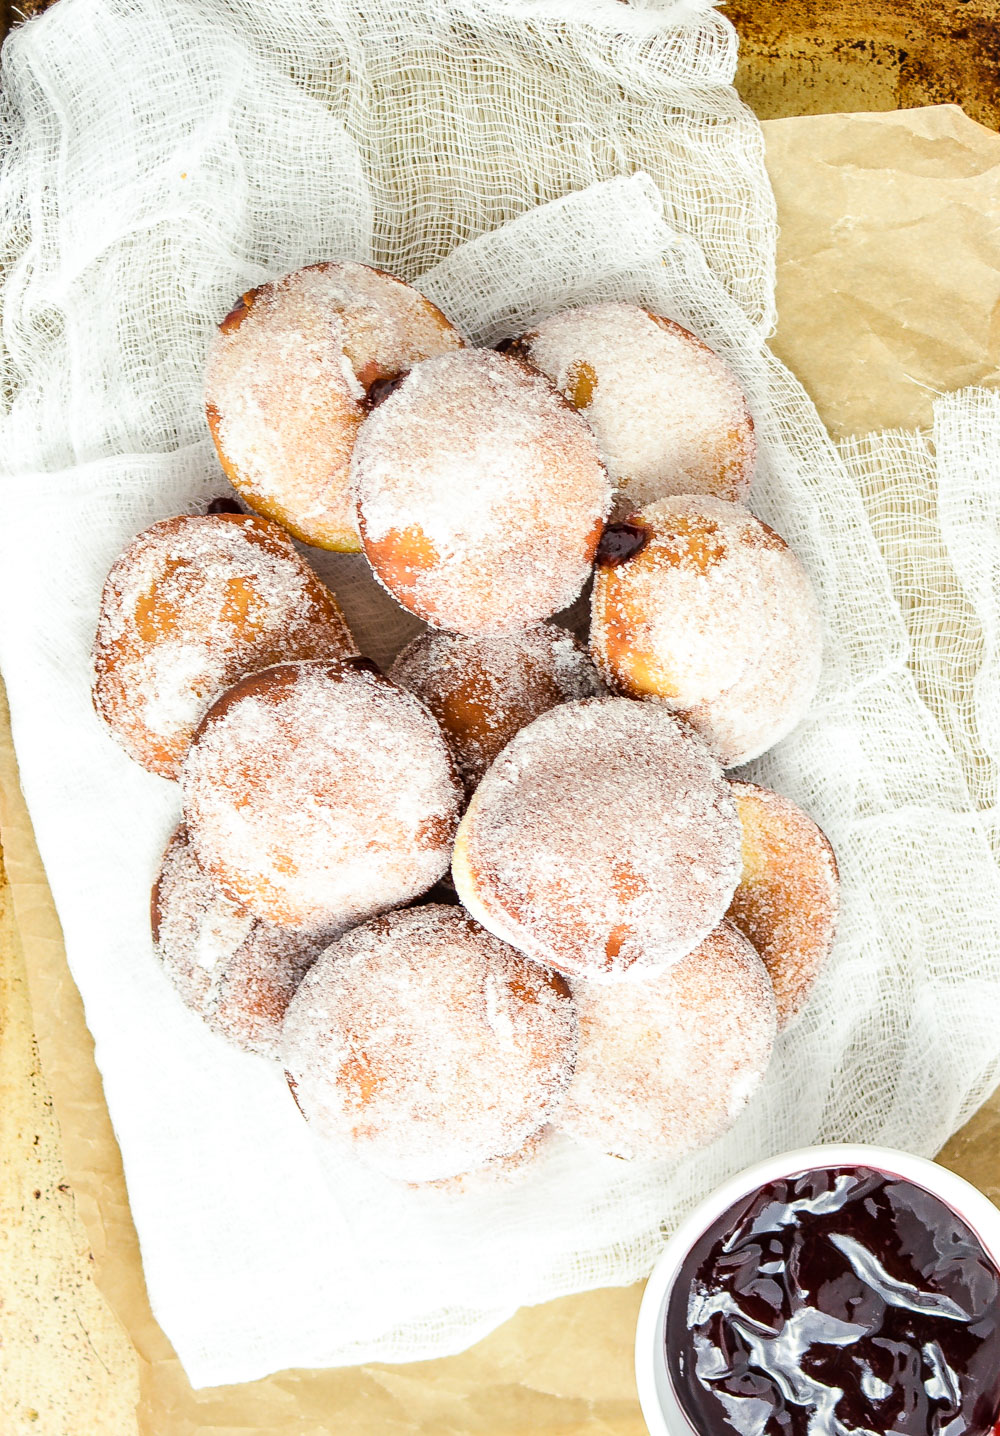 Almond Raspberry Jelly Doughnuts are the perfect sweet treat for breakfast or brunch this spring!